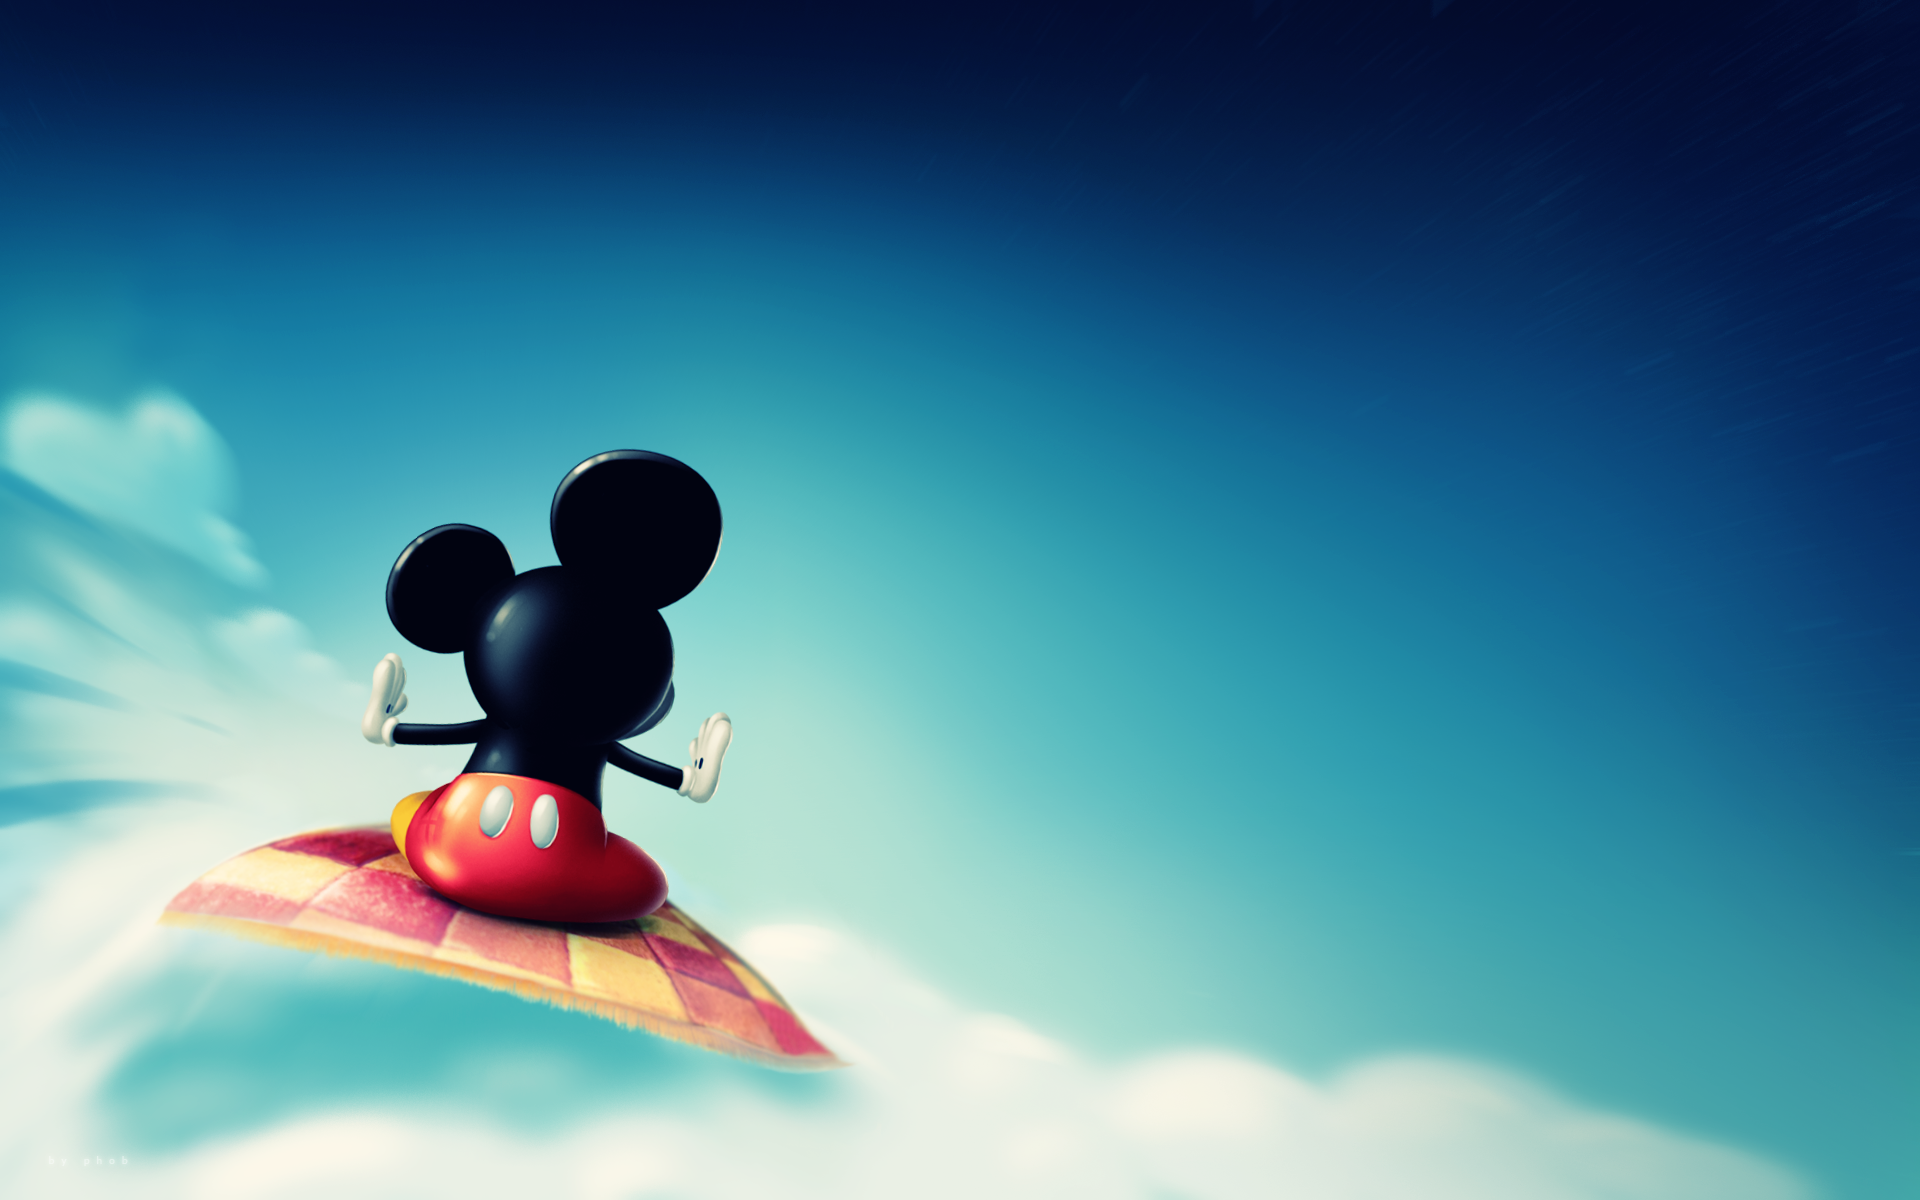 Download Free 50 Disney Wallpaper for Desktop The Quotes